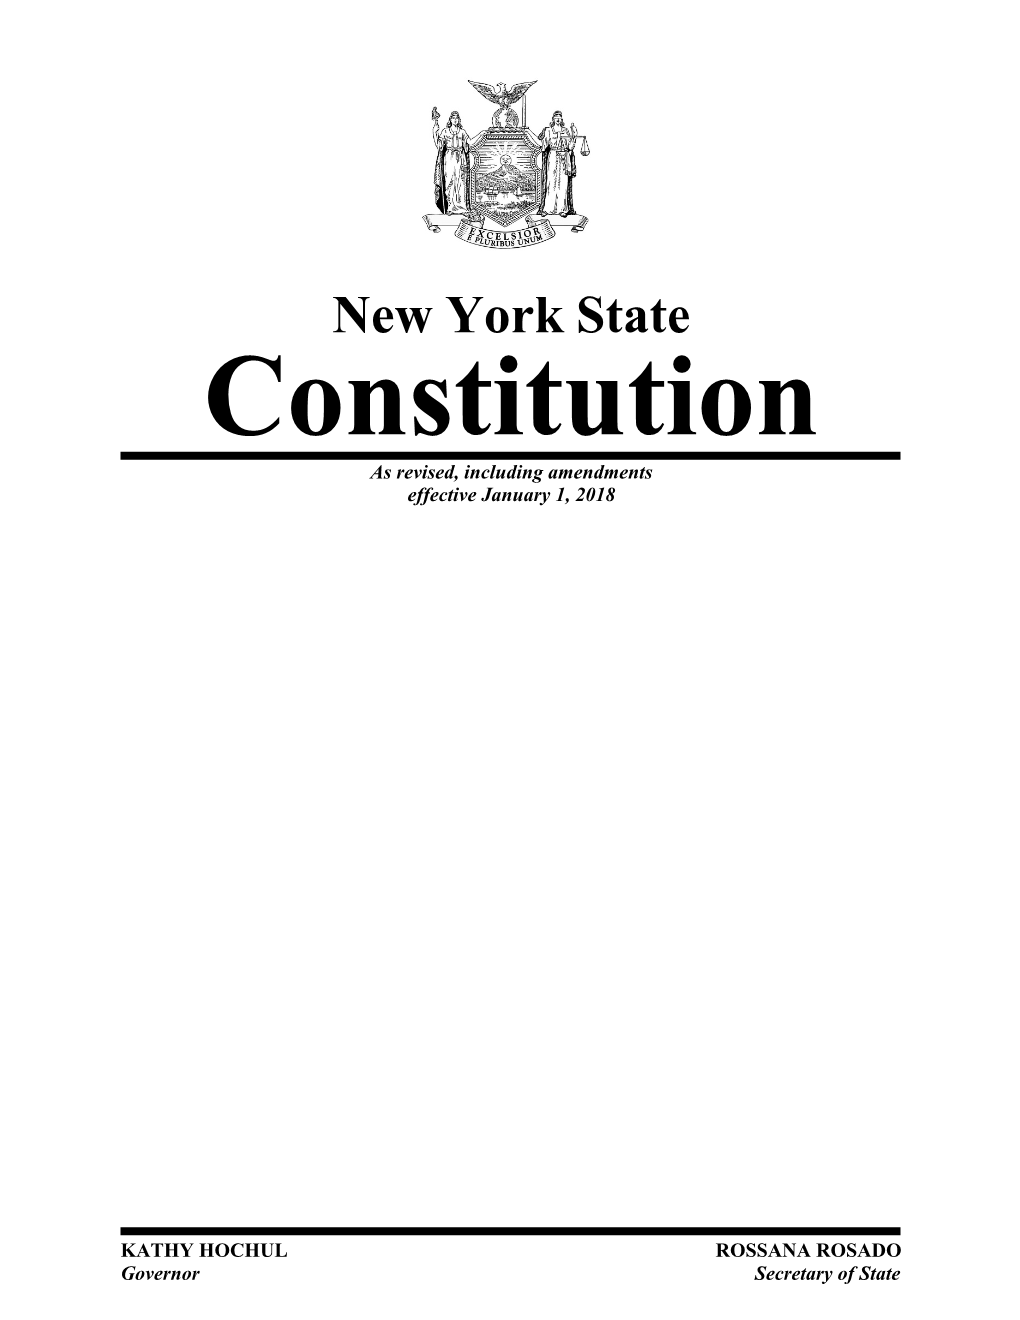 New York State Constitution As Revised, Including Amendments Effective January 1, 2018